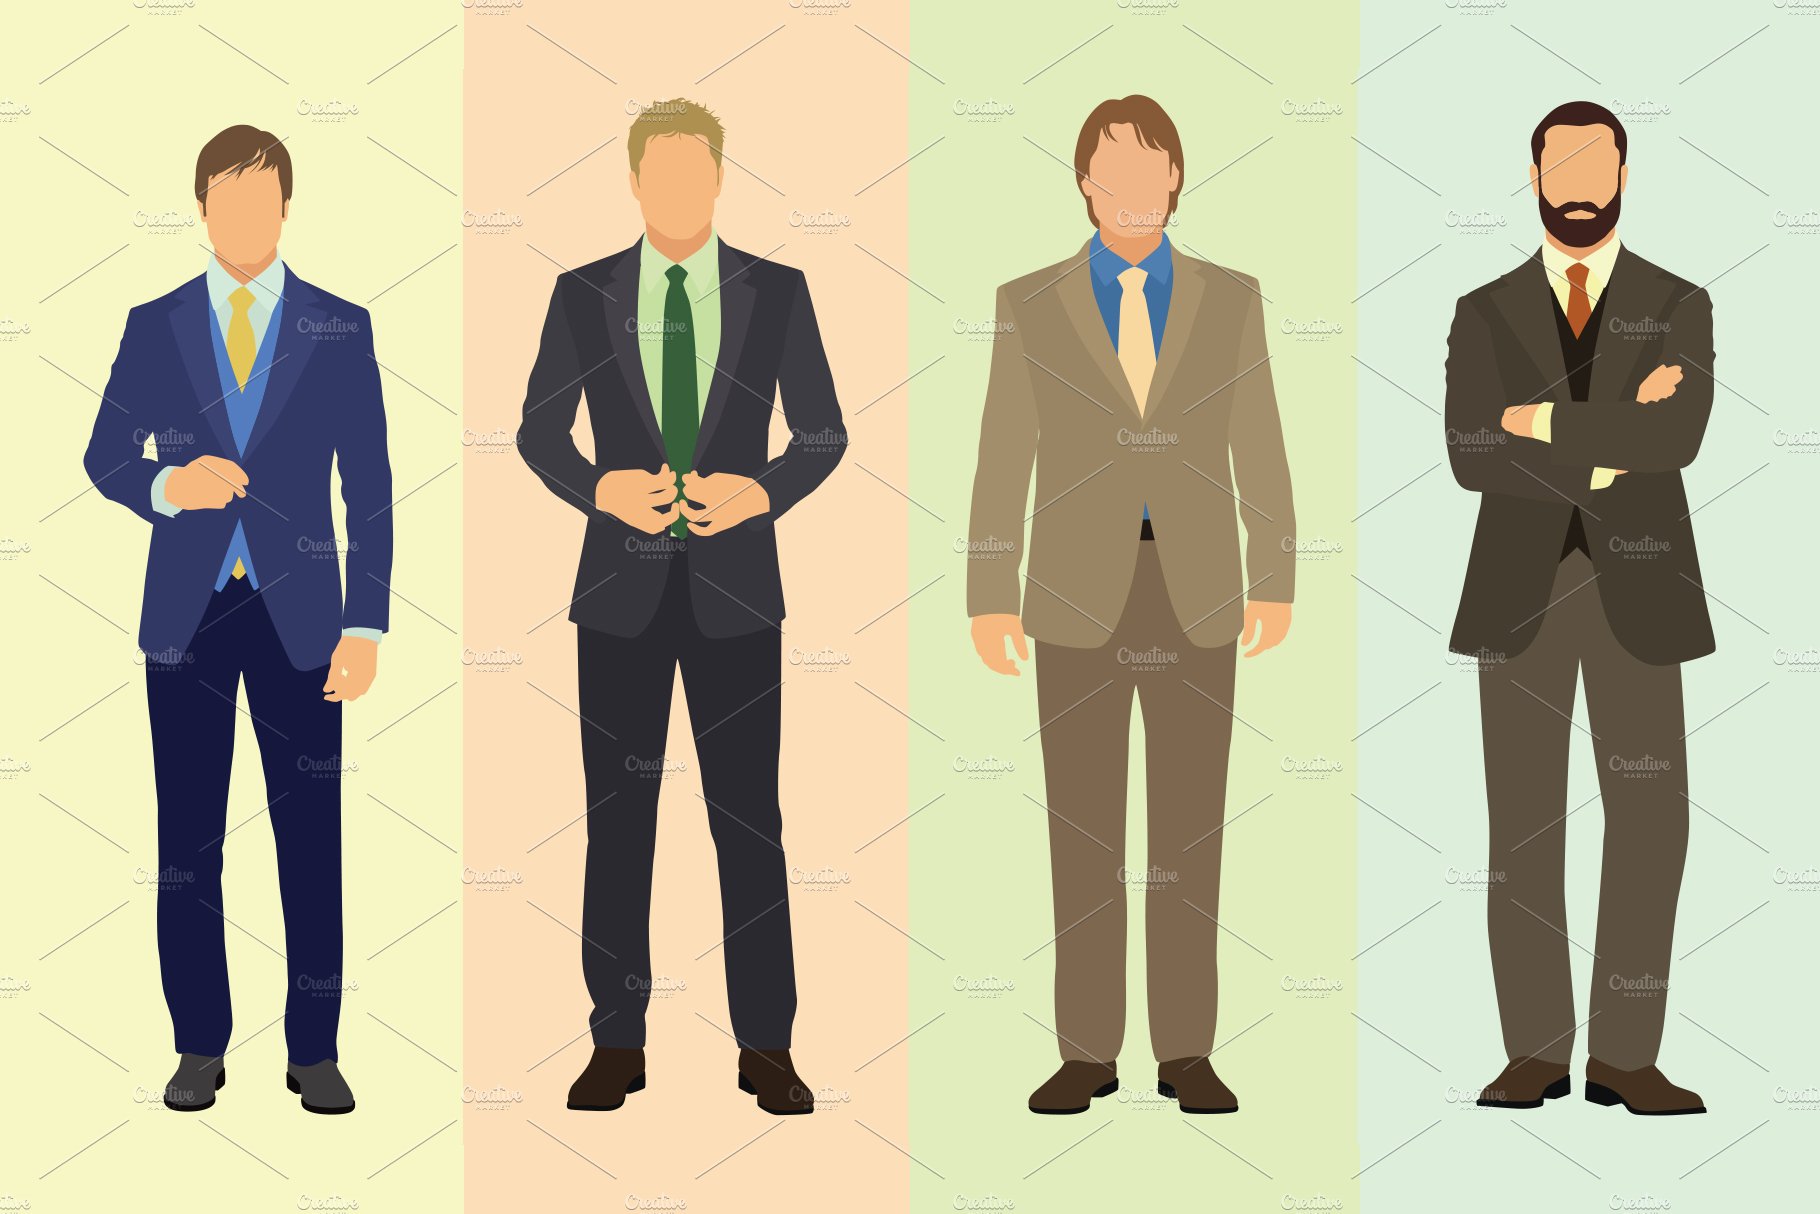 Well-dressed Business Men cover image.